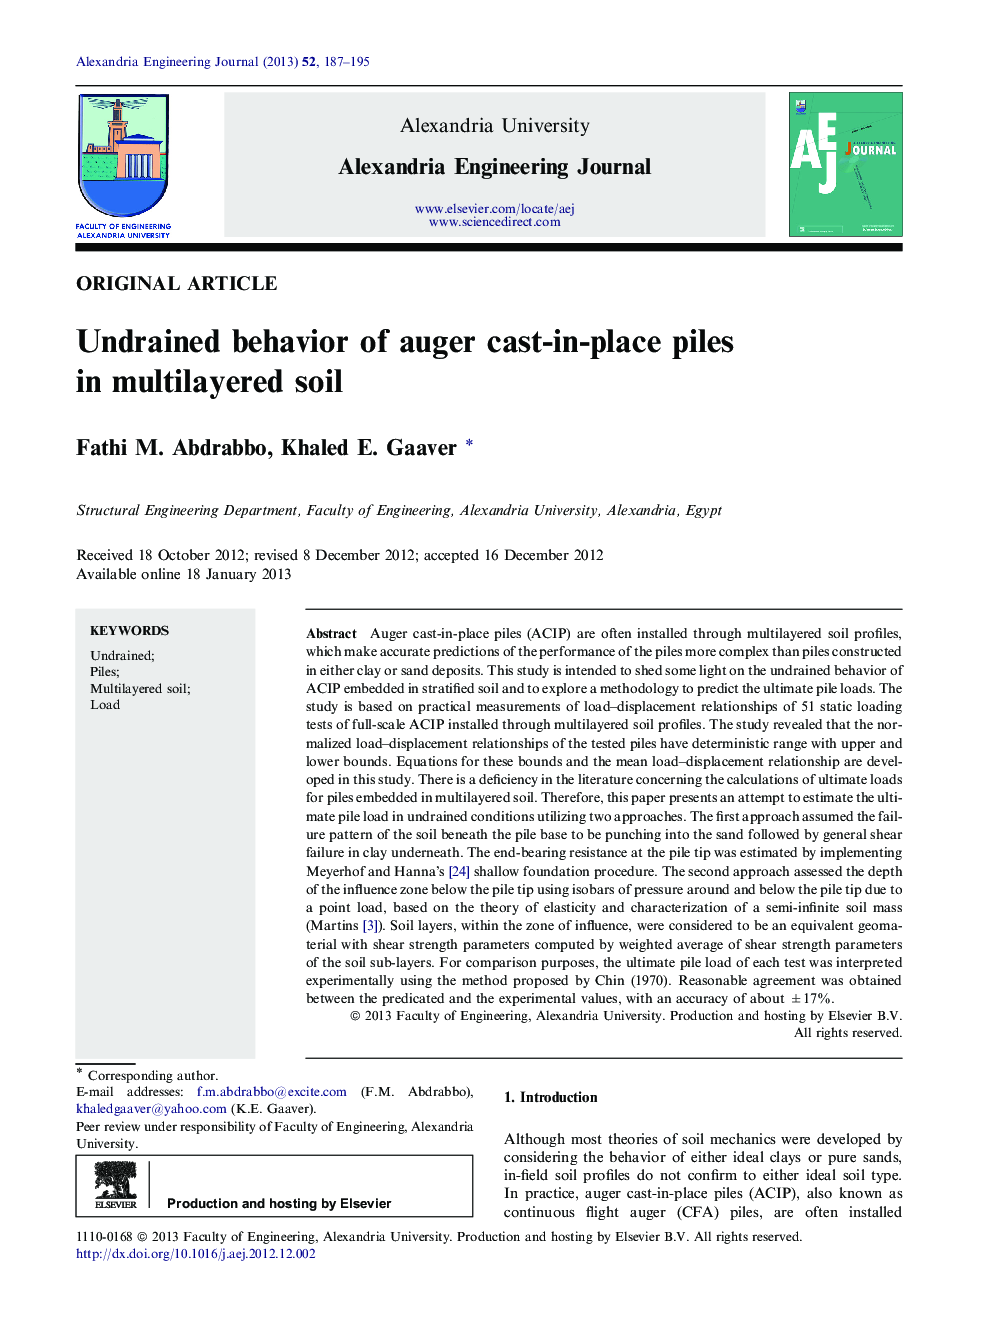 Undrained behavior of auger cast-in-place piles in multilayered soil